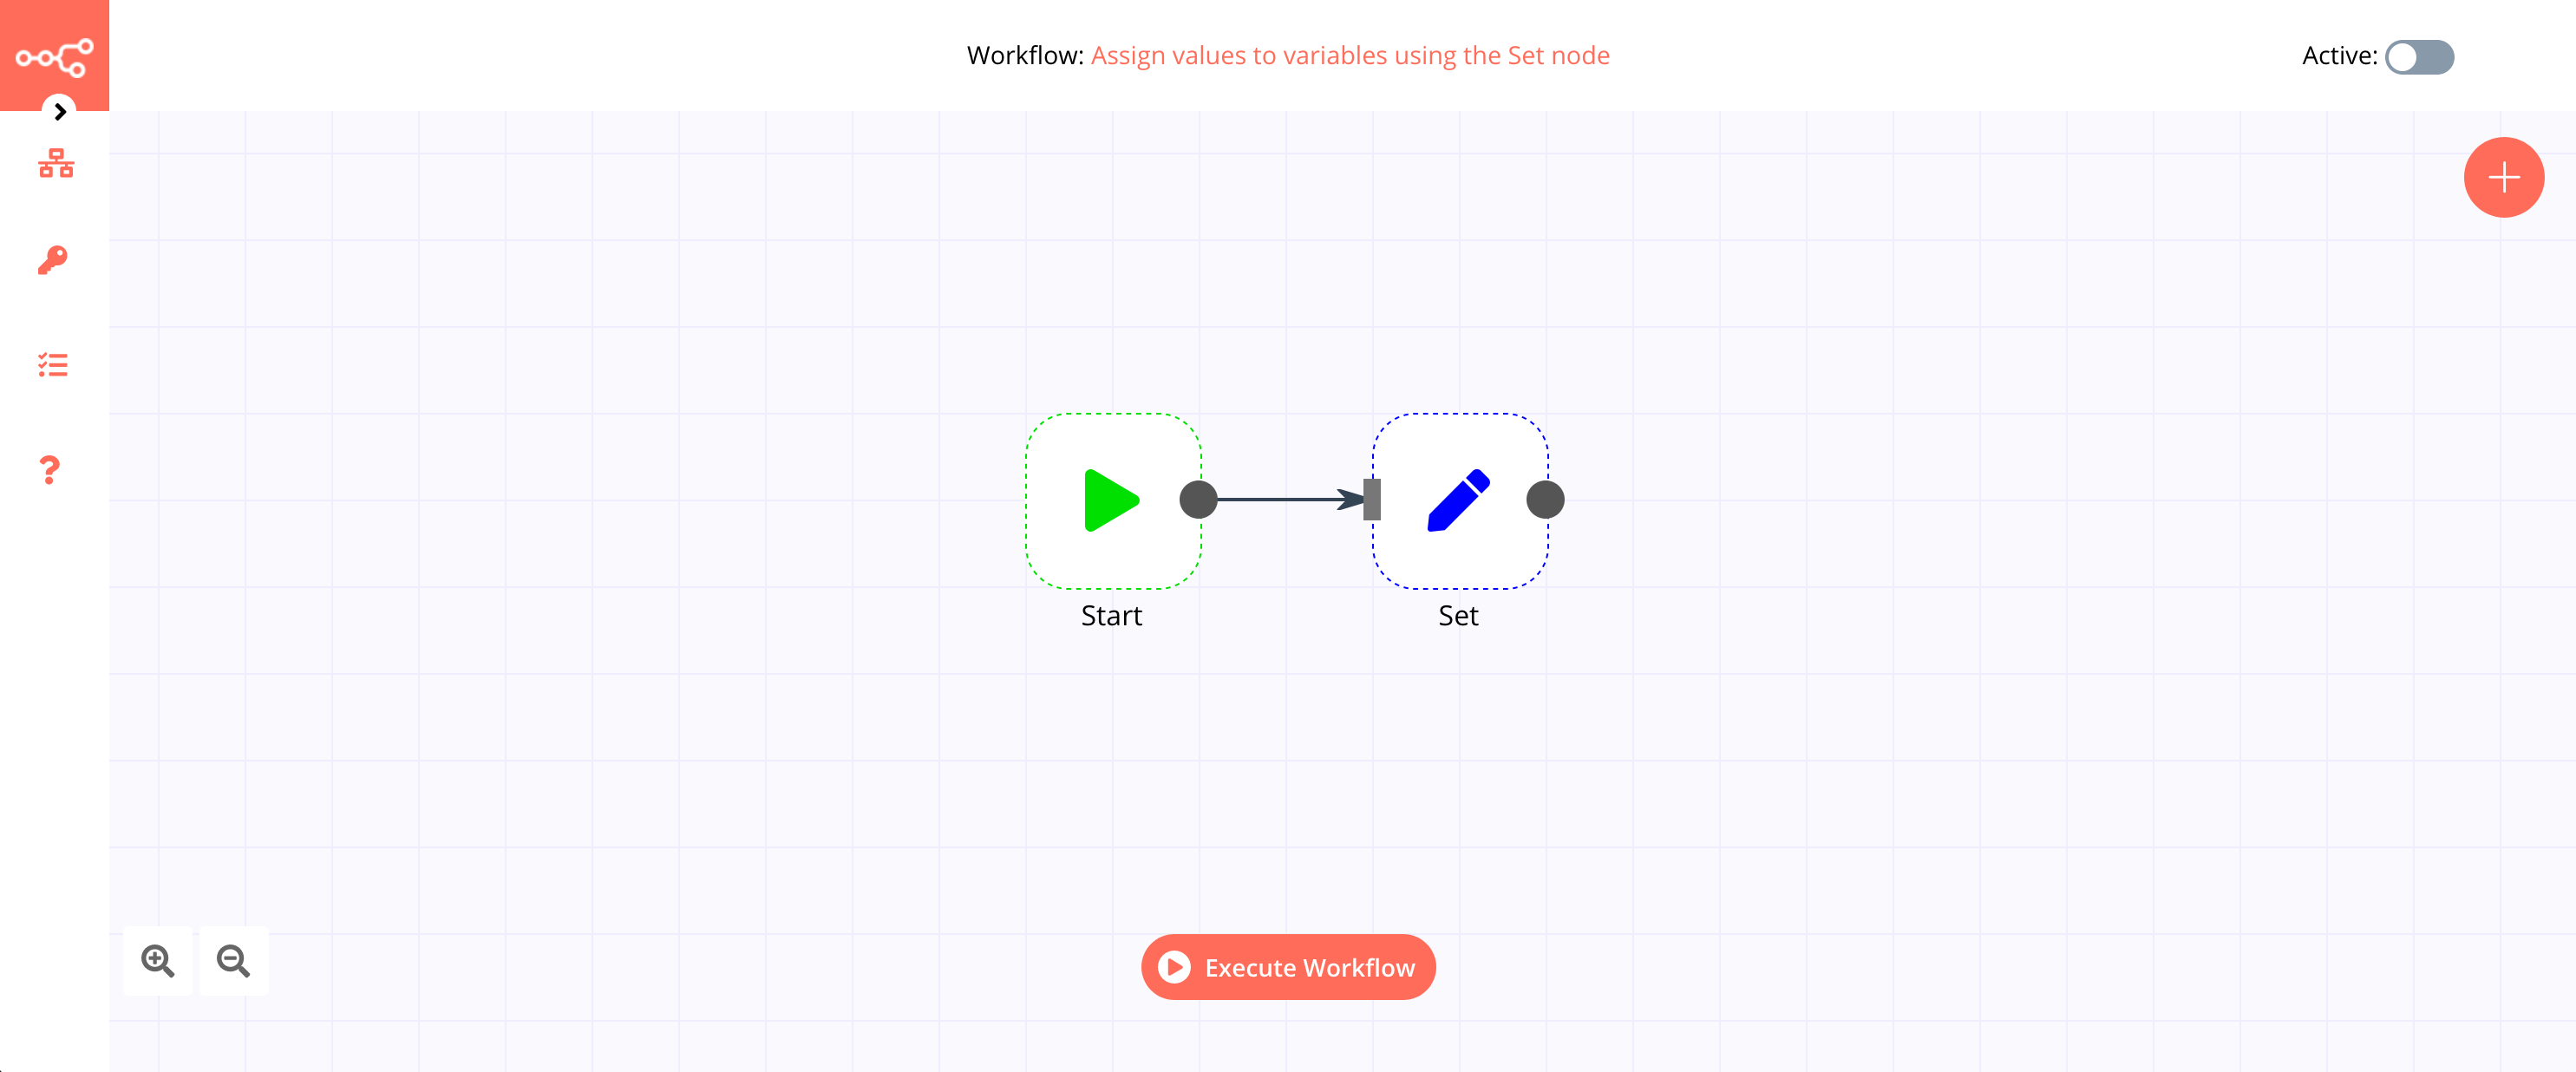 A workflow with the Set node